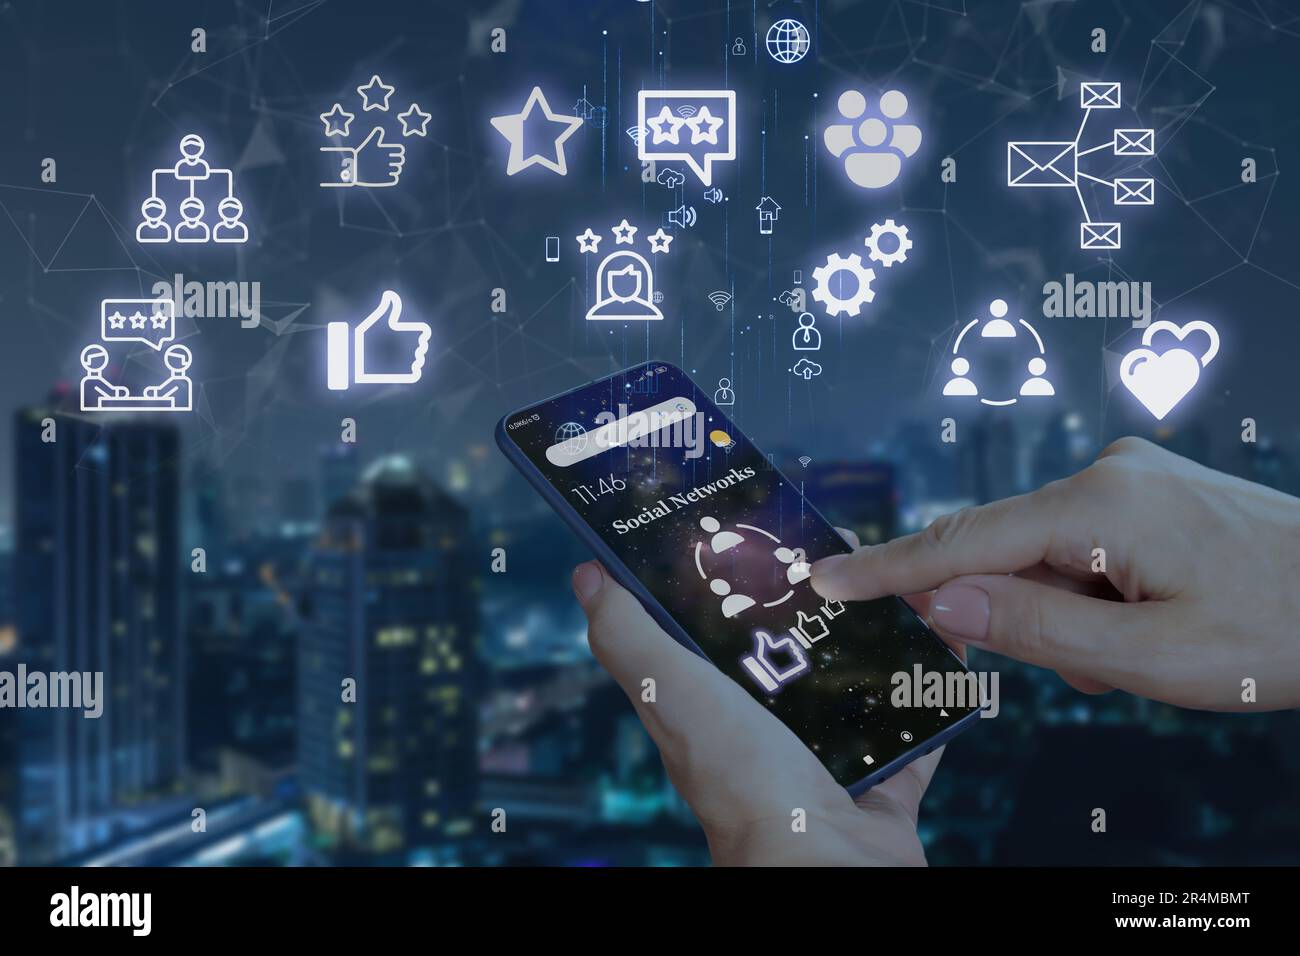 Woman's hands with smartphone and social networking icons on background of night city. Concept of global mobile communication and social networks Stock Photo